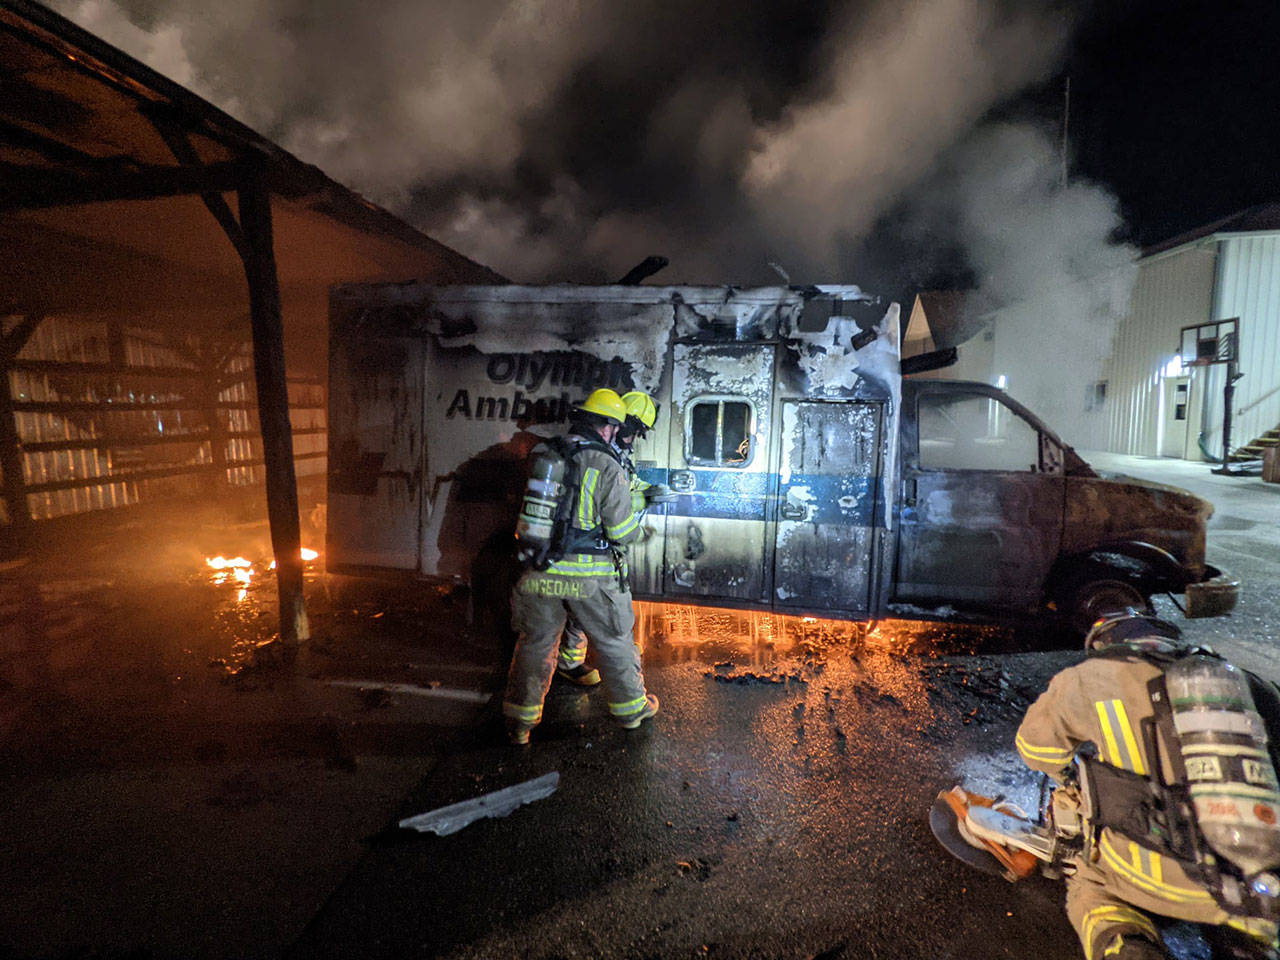 Firefighters respond to an early-morning fire at Olympic Ambulance on July 13. Photo courtesy of Clallam County Fire District 3